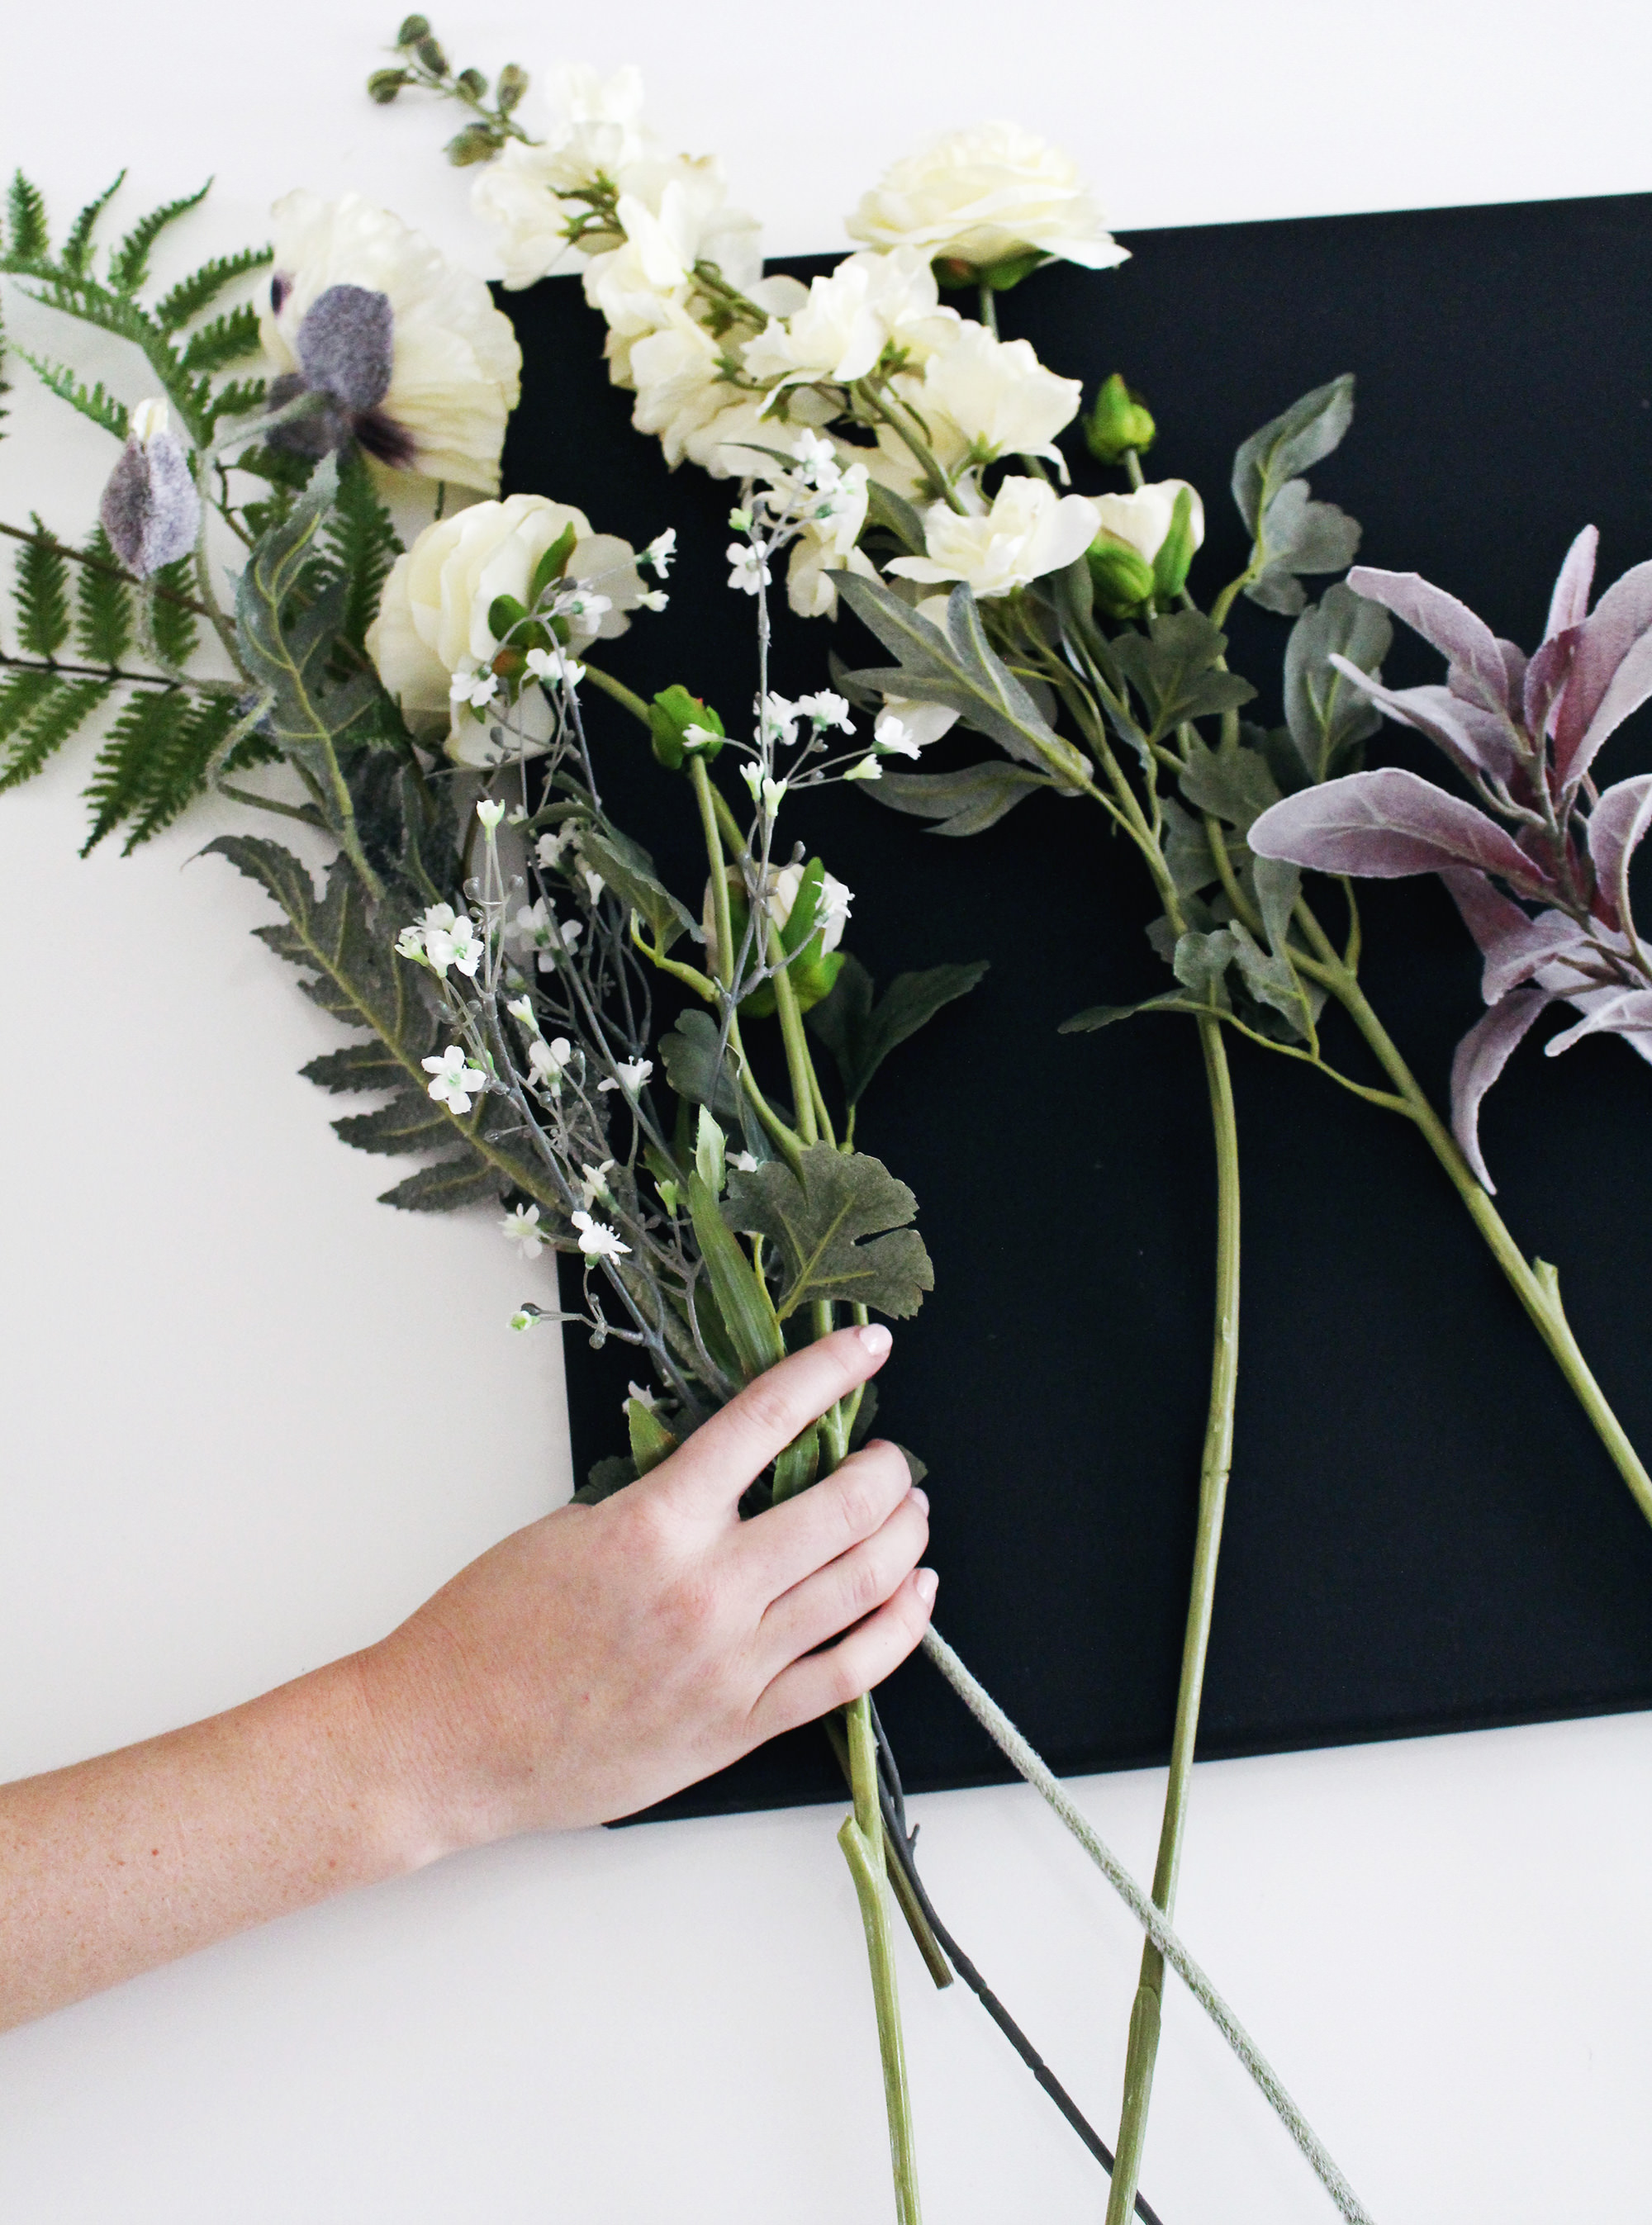 Choose faux flowers to create 3-D flower canvas wall art